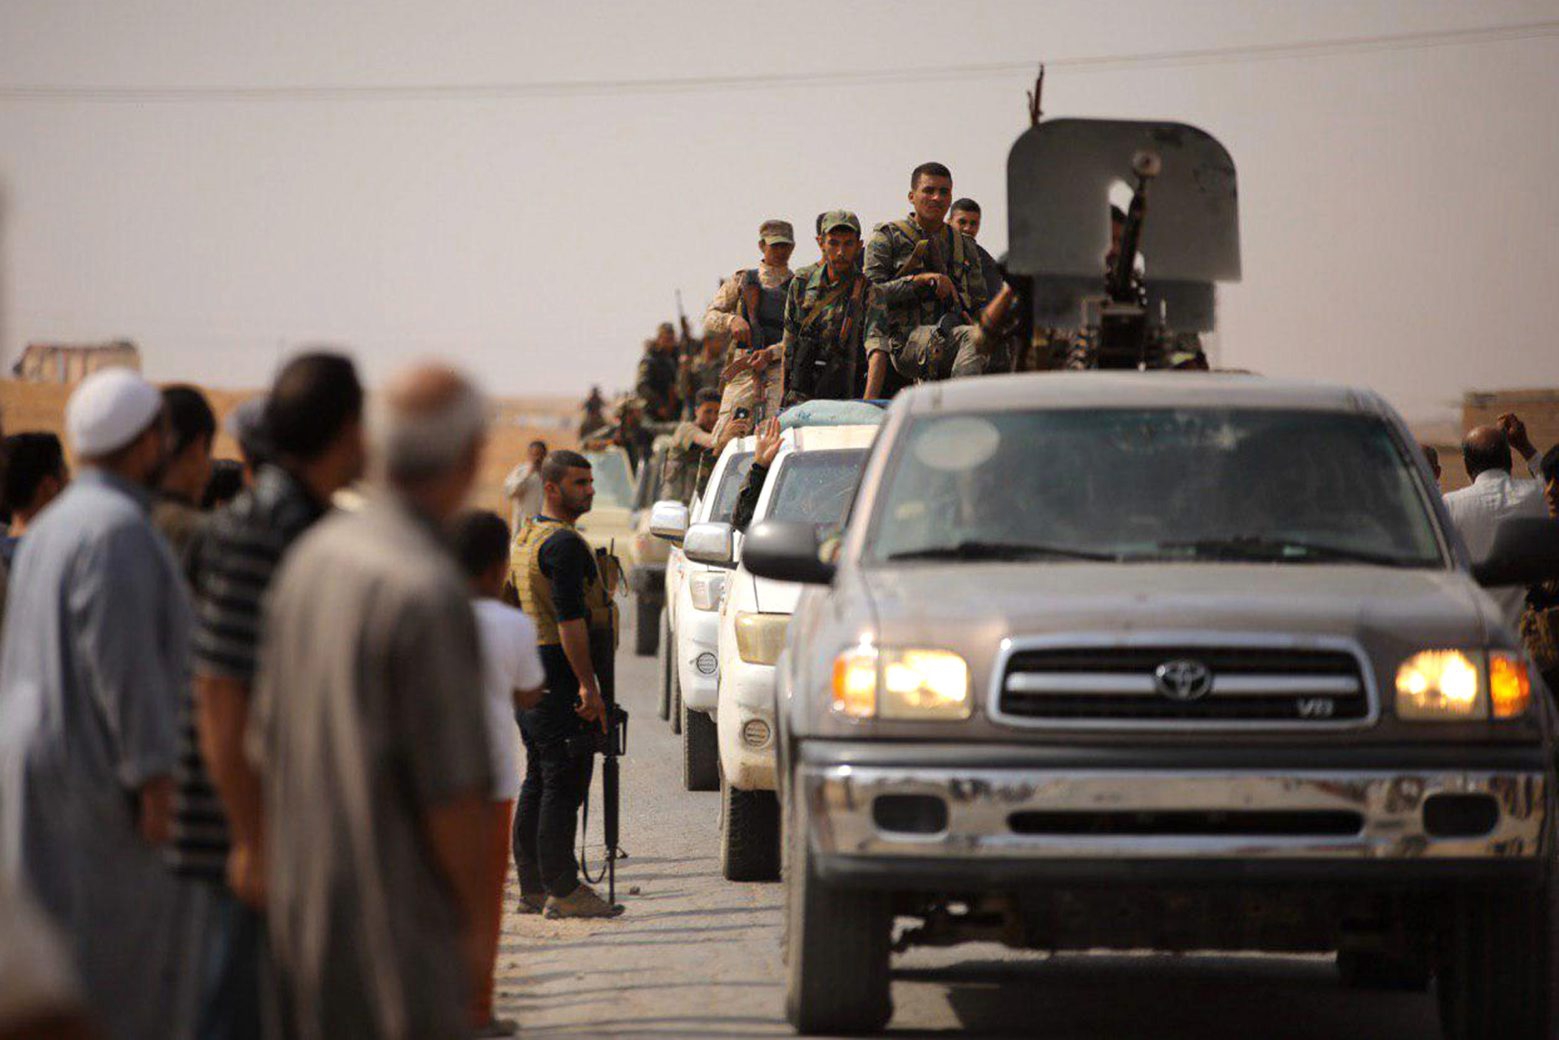 In this photo released by the Syrian official news agency SANA, Syrian troops enter the town of Ein Issa, north of Raqqa, Syria, Monday, Oct 14, 2019. Syrian troops moved east from Aleppo province to Raqqa where state media said they had reached Ein Issa. Heavy fighting the previous day there reached a Kurdish-run displaced-person camp that is home to some 12,000 people, including around 1,000 wives and widows of IS fighters and their children. Hundreds are believed to escaped amid the chaos. (SANA via AP) Syria